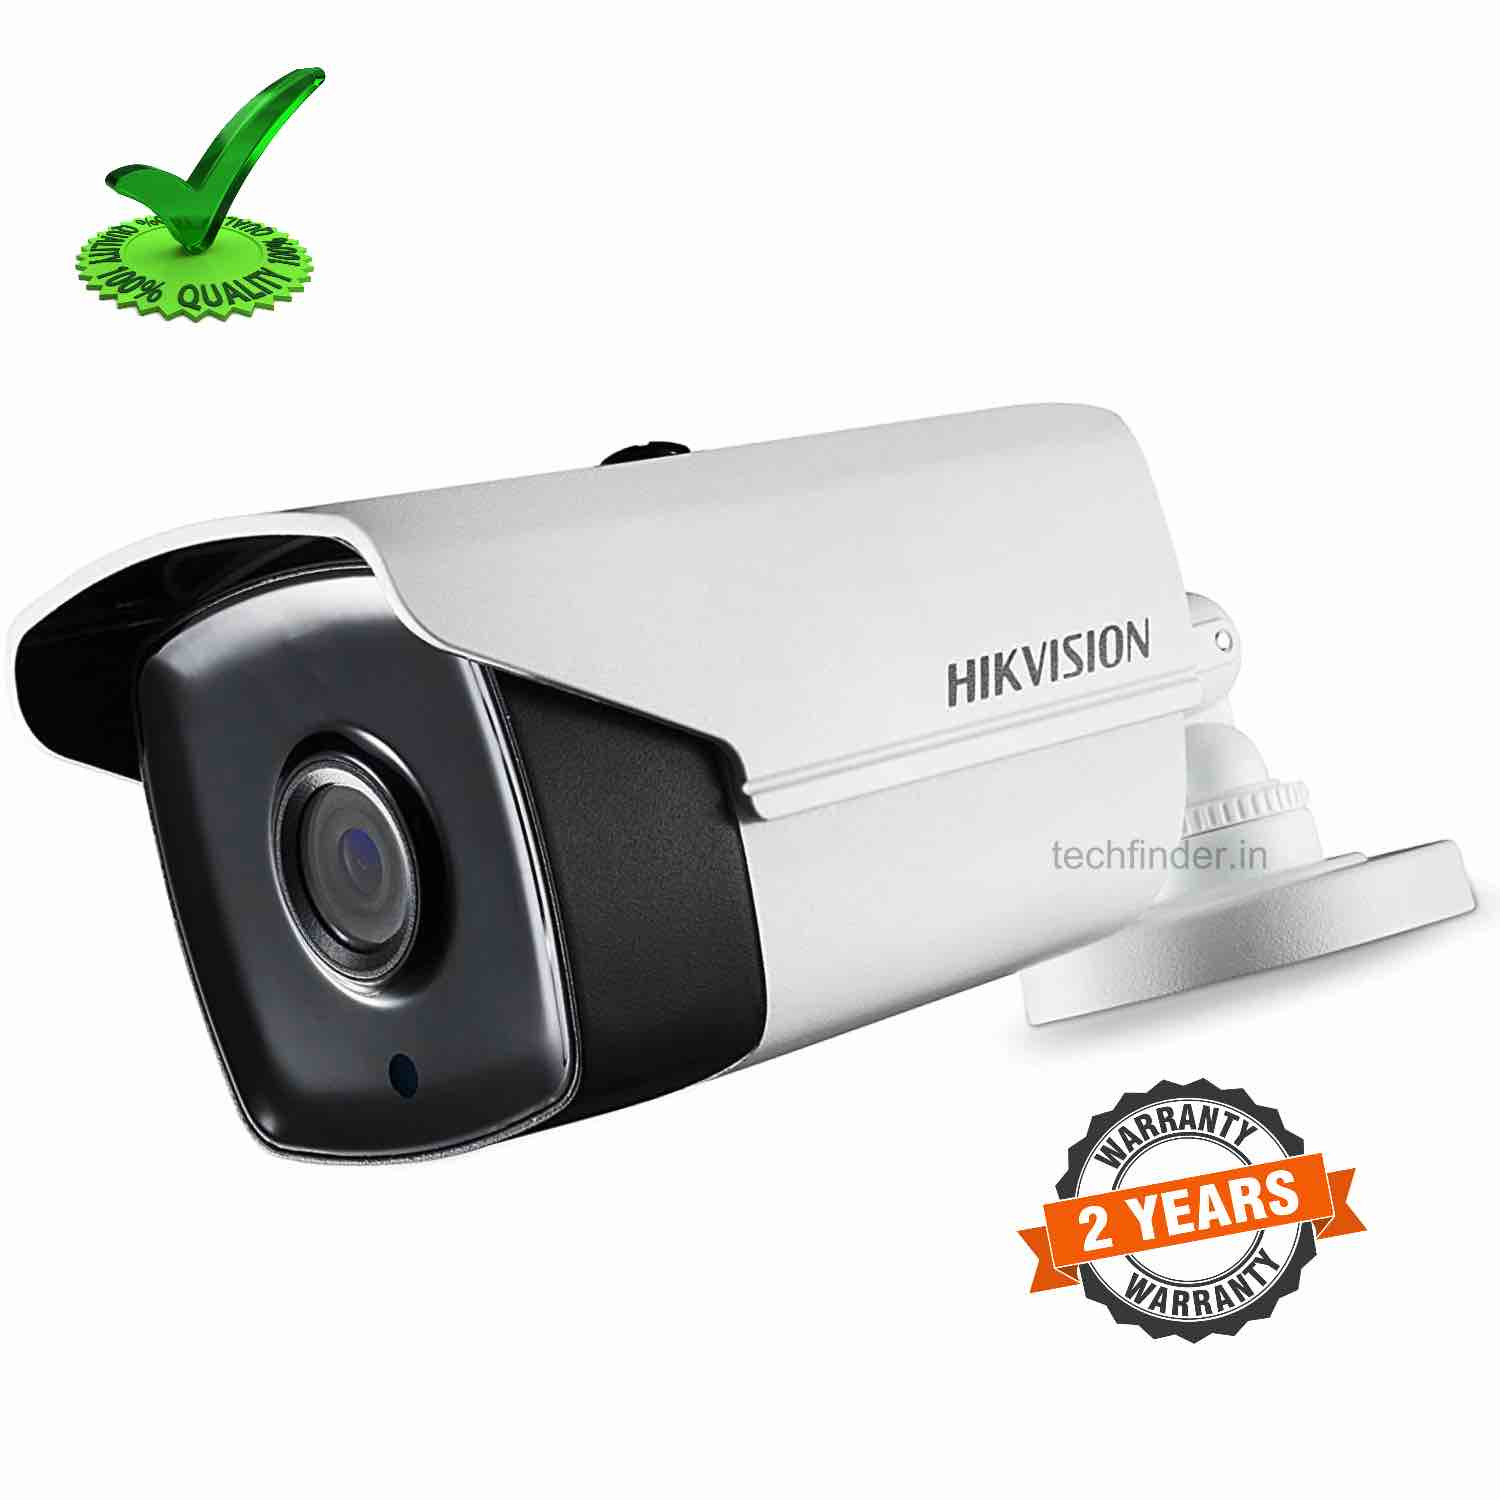  Hikvision DS 2CE16H0T ITPF 5mp Ir Hd Bullet Camera